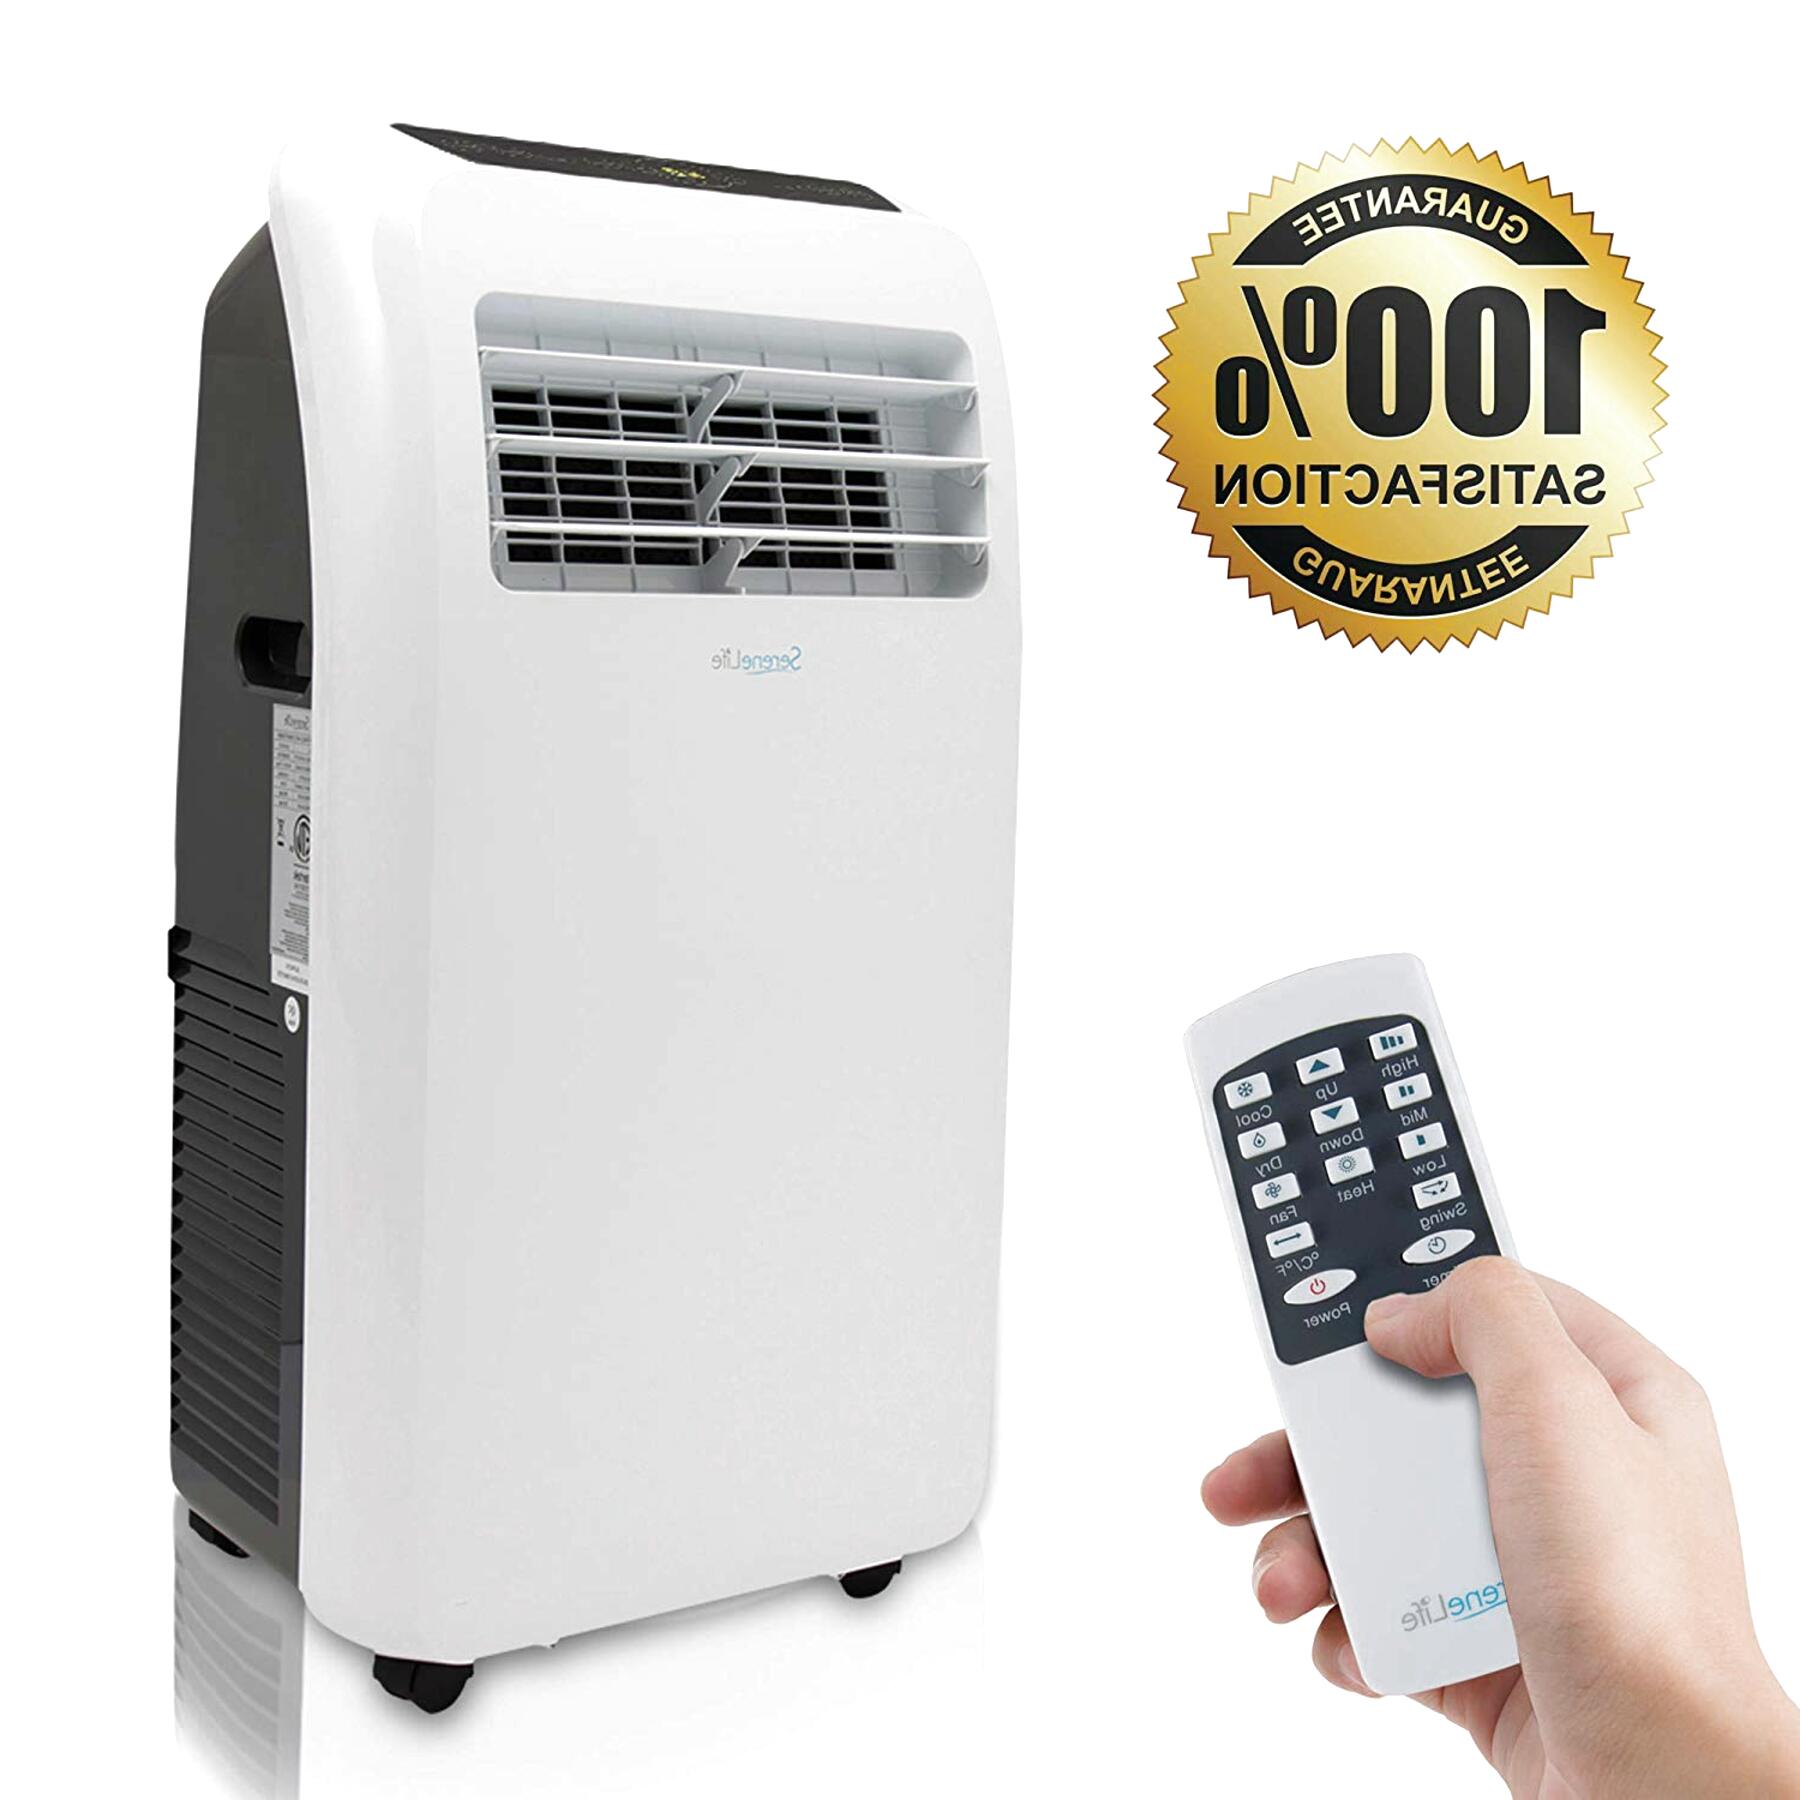 Second Hand Dehumidifier Heater In Ireland View 38 Ads .dehumidifiers, dehumidifier parts, shoe dryers with dehumidifier and ranking keywords. for sale ie